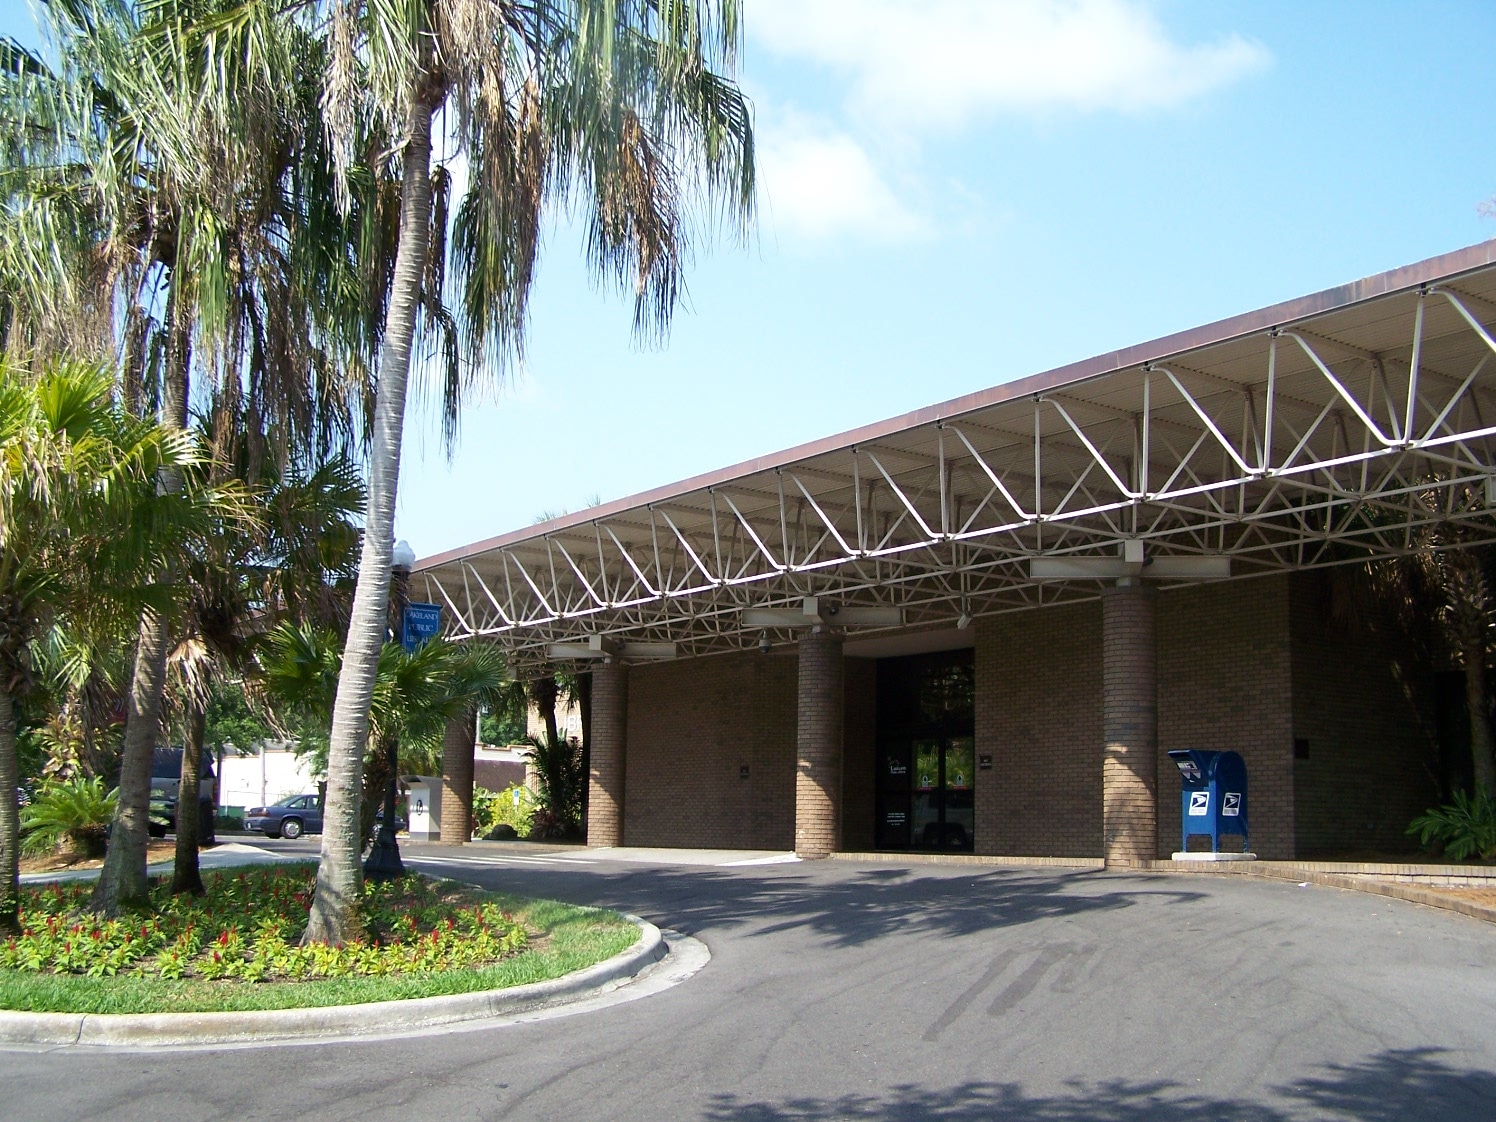 View of the front entrance and drive at the Lakeland Public Library